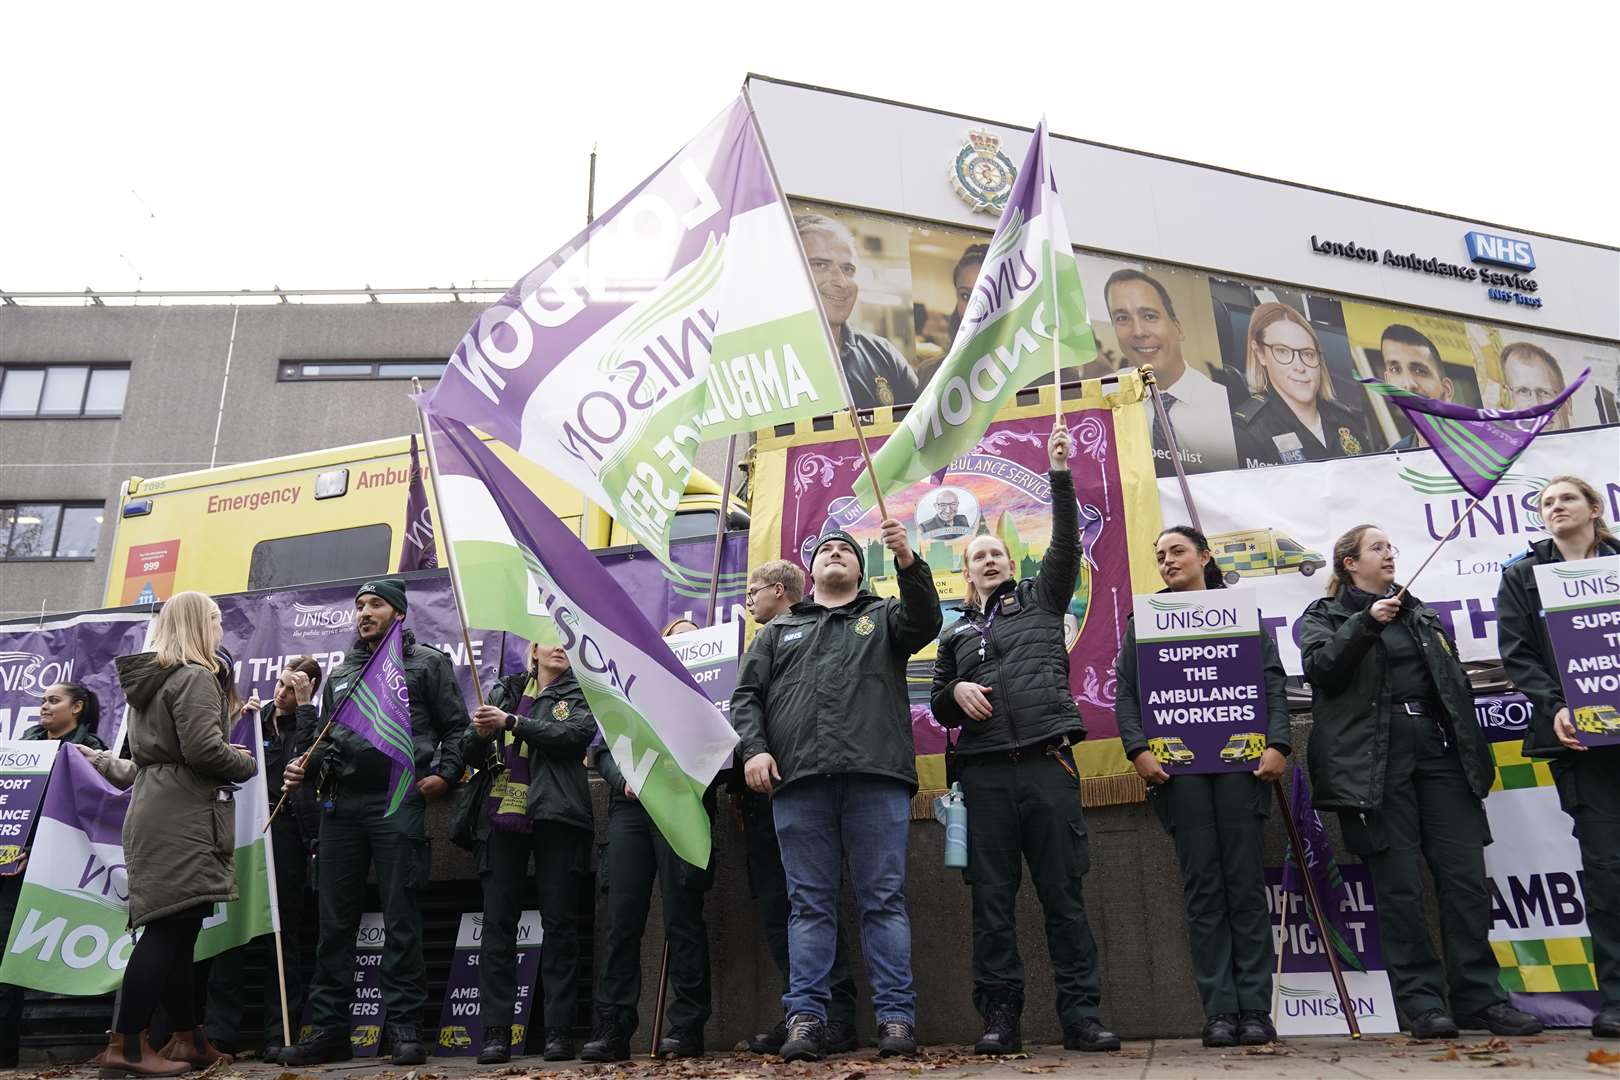 Ambulance workers on the picket line outside Waterloo ambulance station in London in December (Kirsty O’Connor/PA)